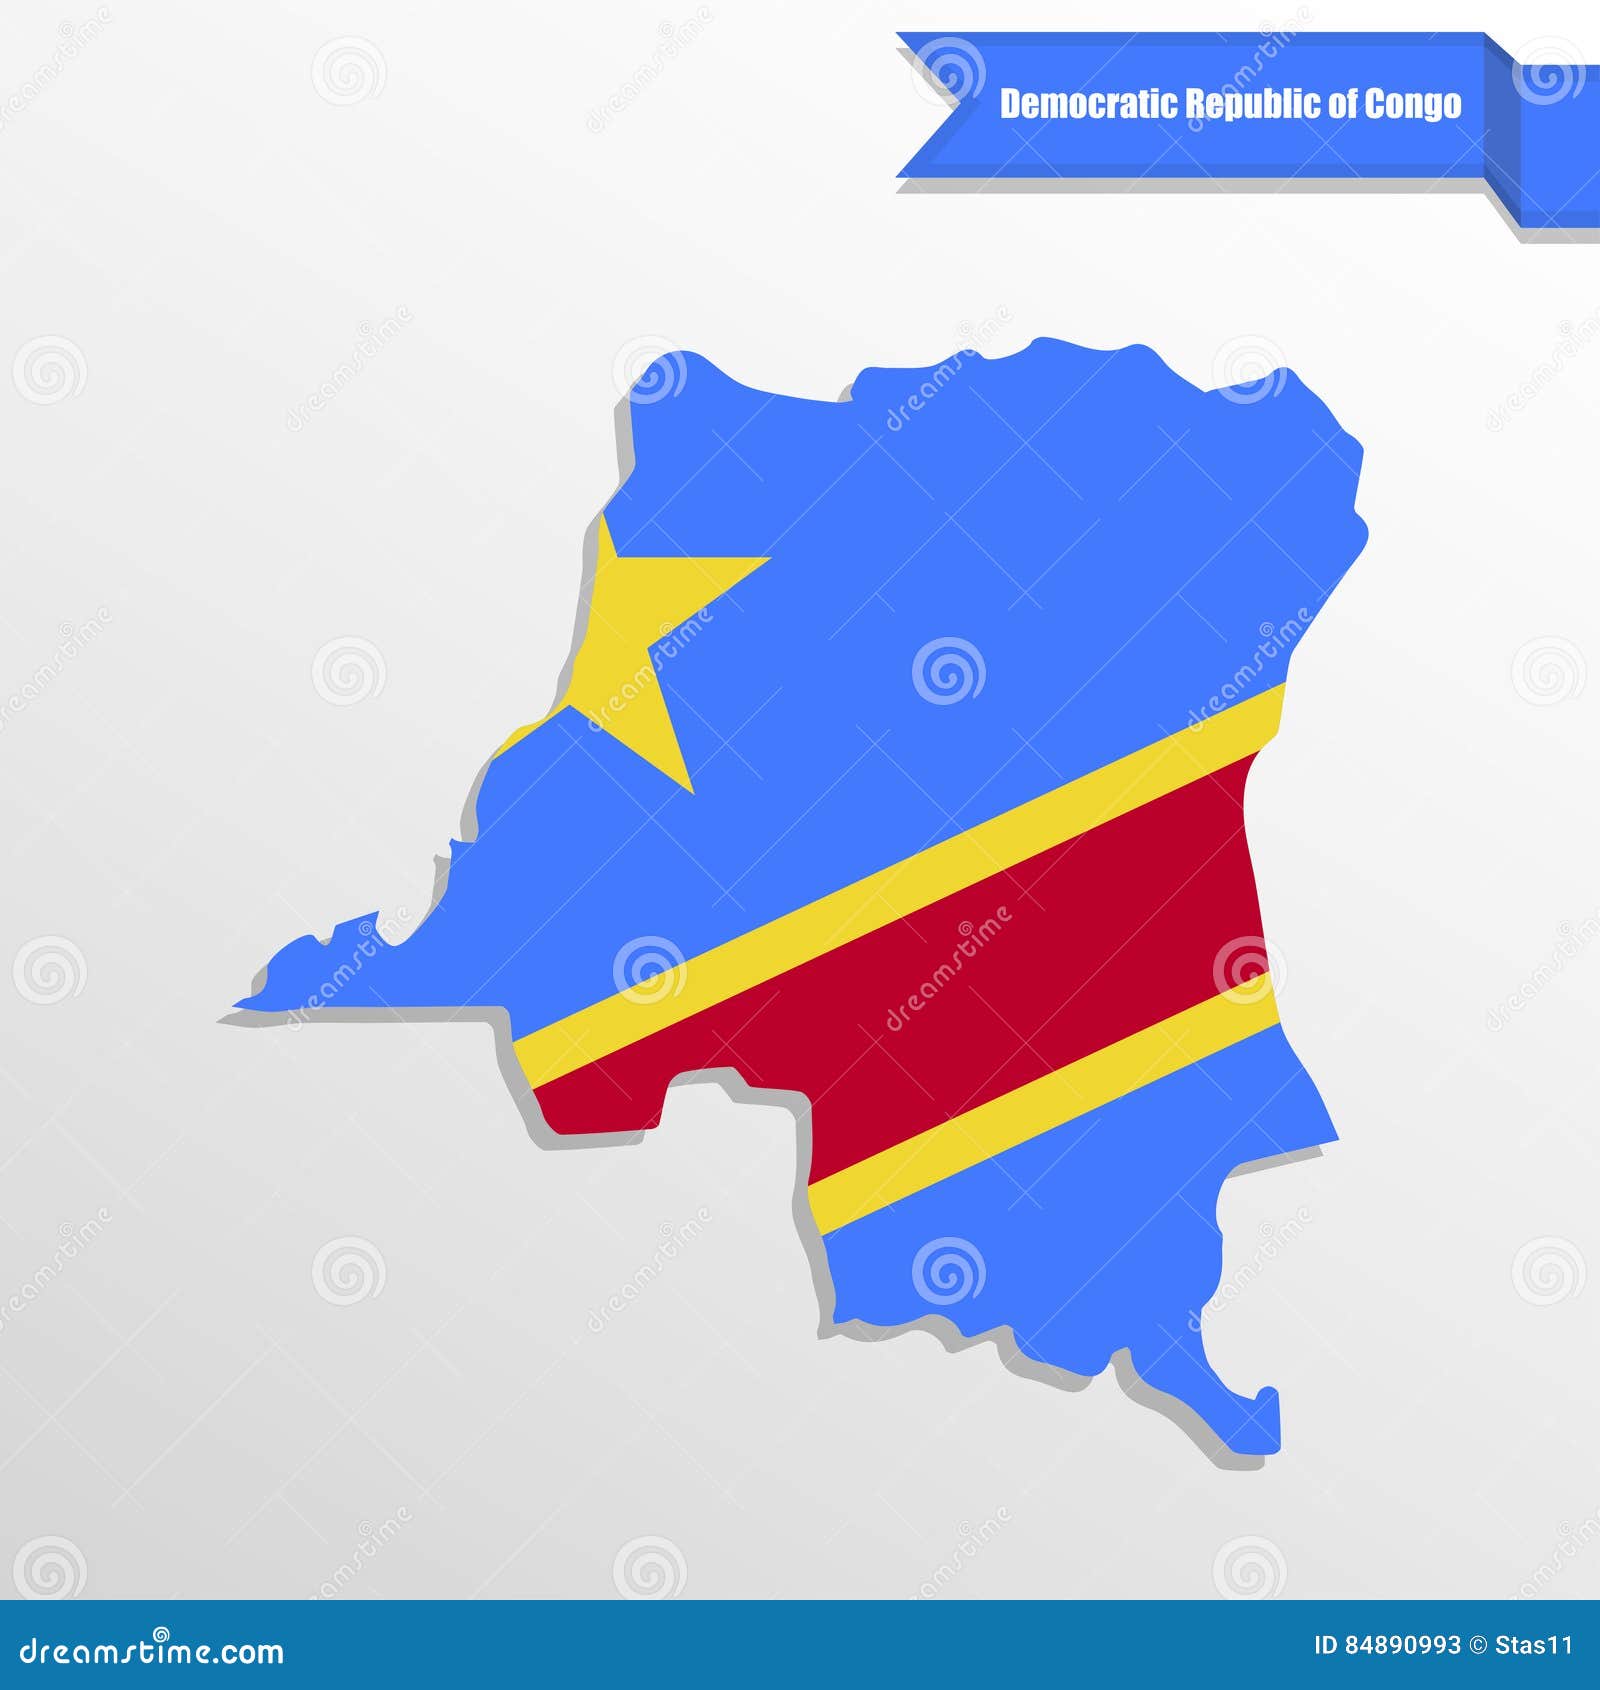 democratic repuplic of congo map with flag inside and ribbon